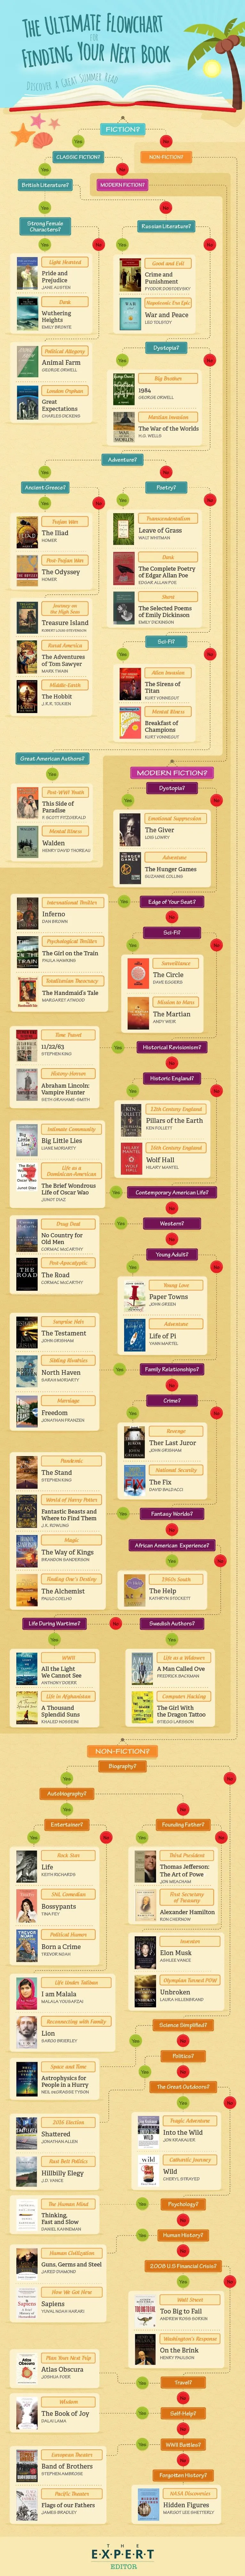 The Ultimate Flowchart for Finding Your Next Book - #infographic